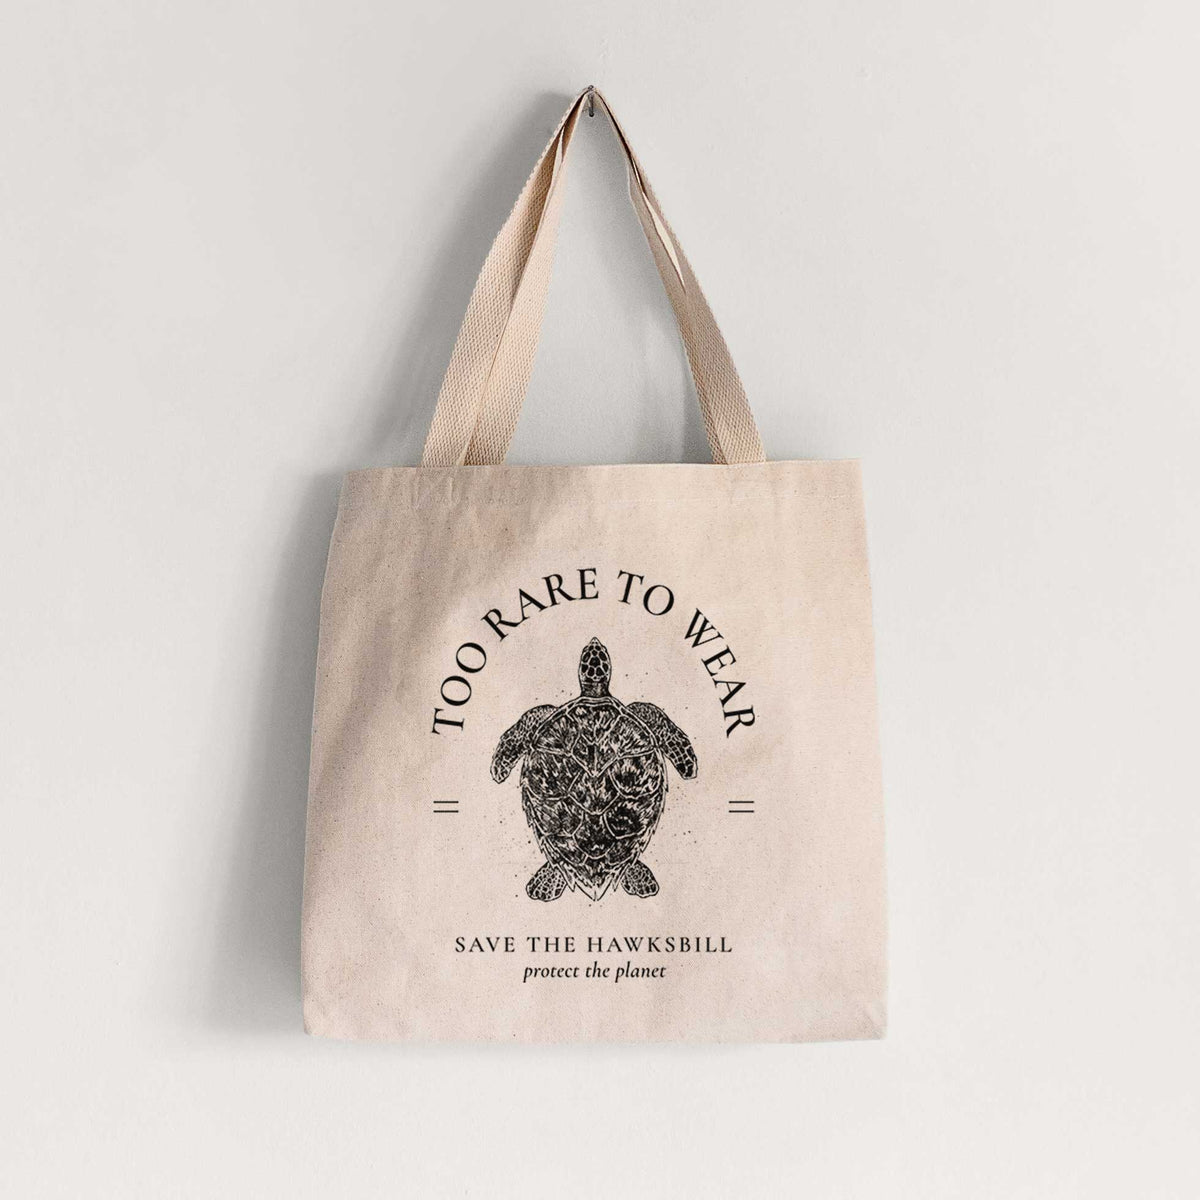 Too Rare to Wear - Save the Hawksbill - Tote Bag